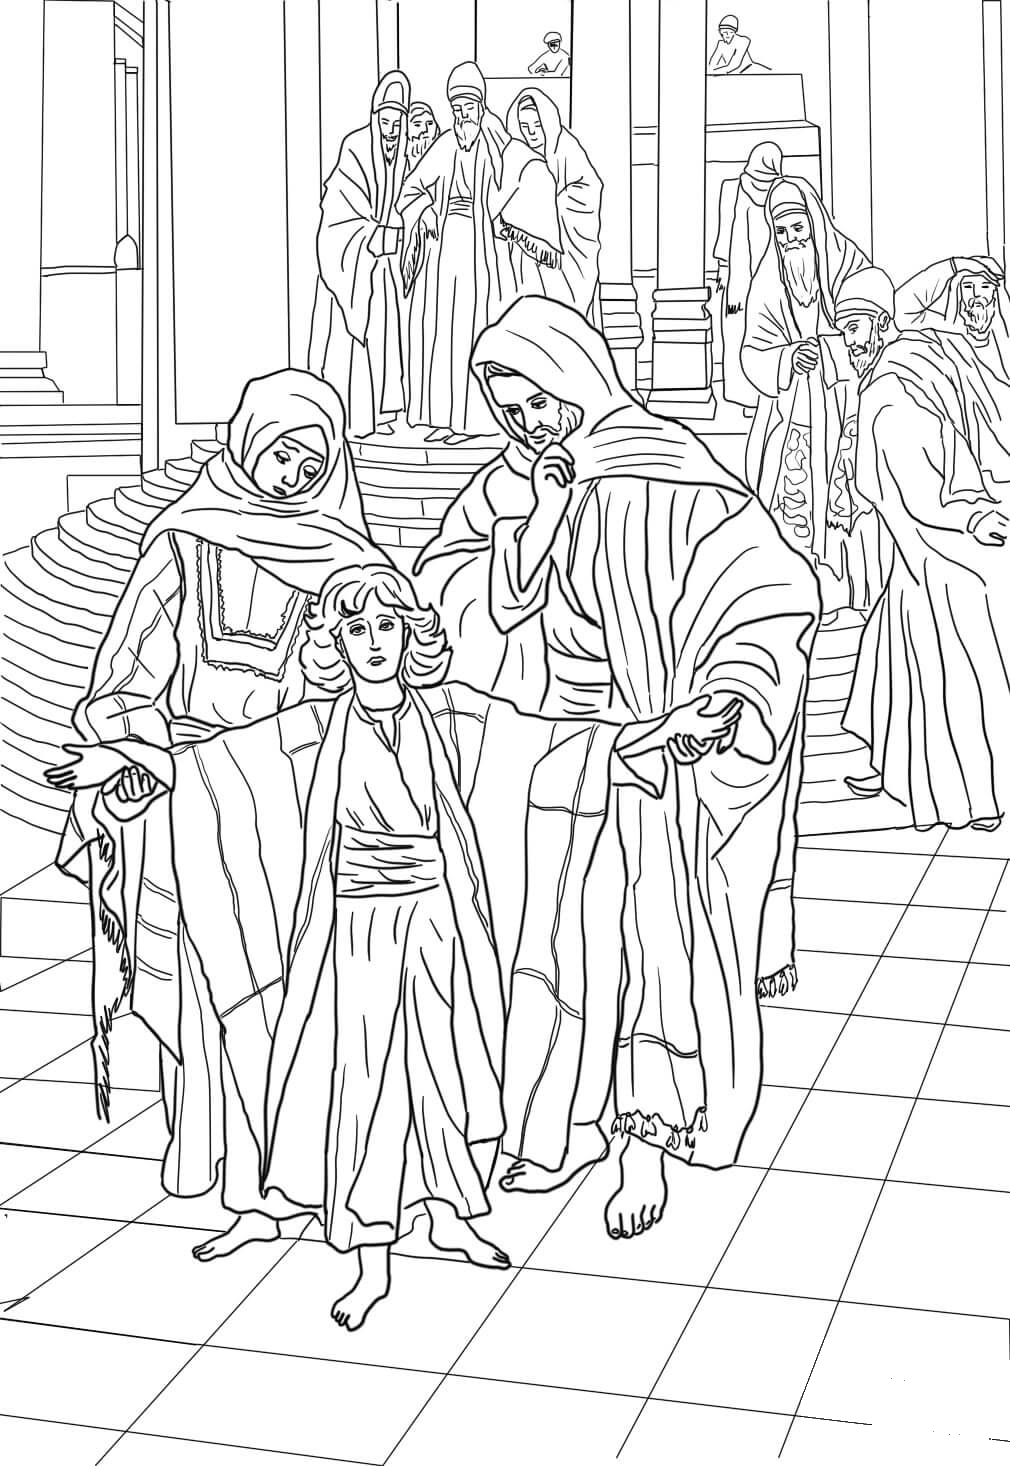 12 Year Old Jesus Found In The Temple Coloring Page Colouringpages